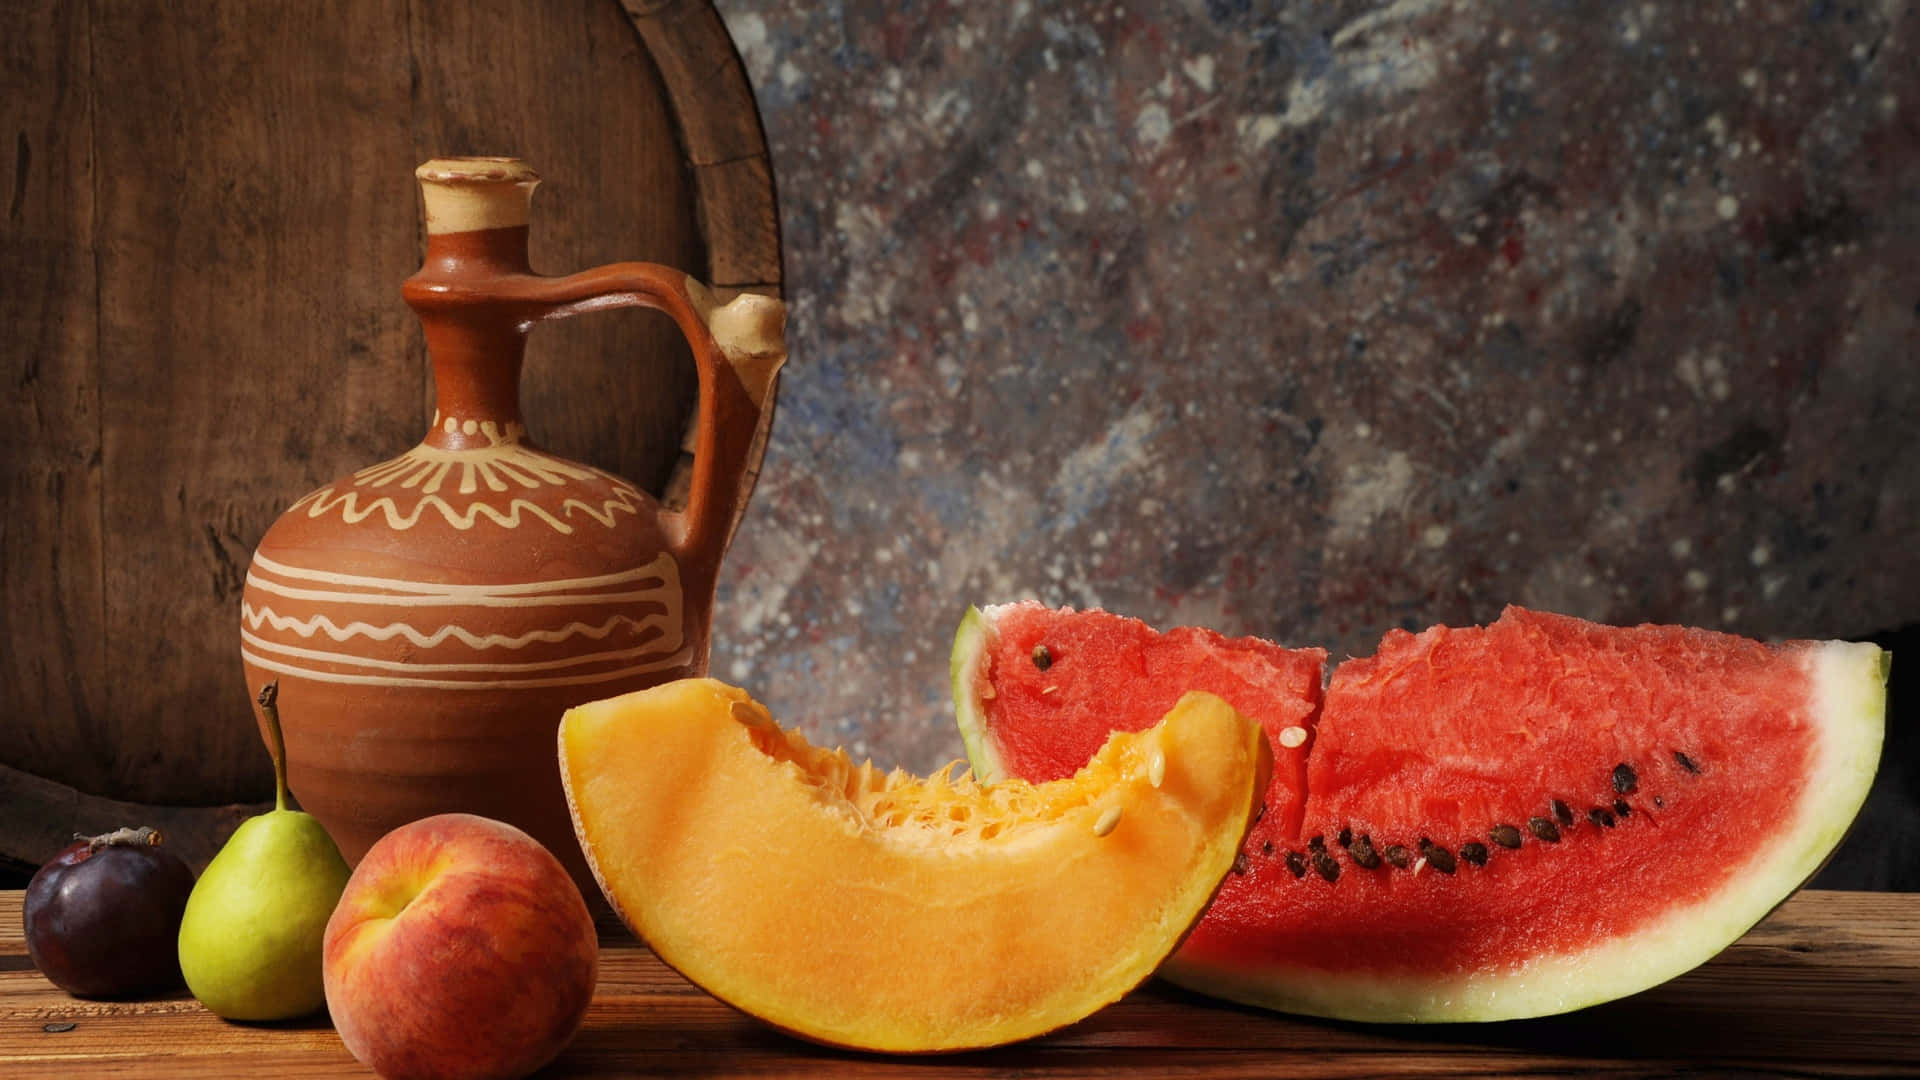 Aesthetic Jar And Several Fruits For Watermelon Background